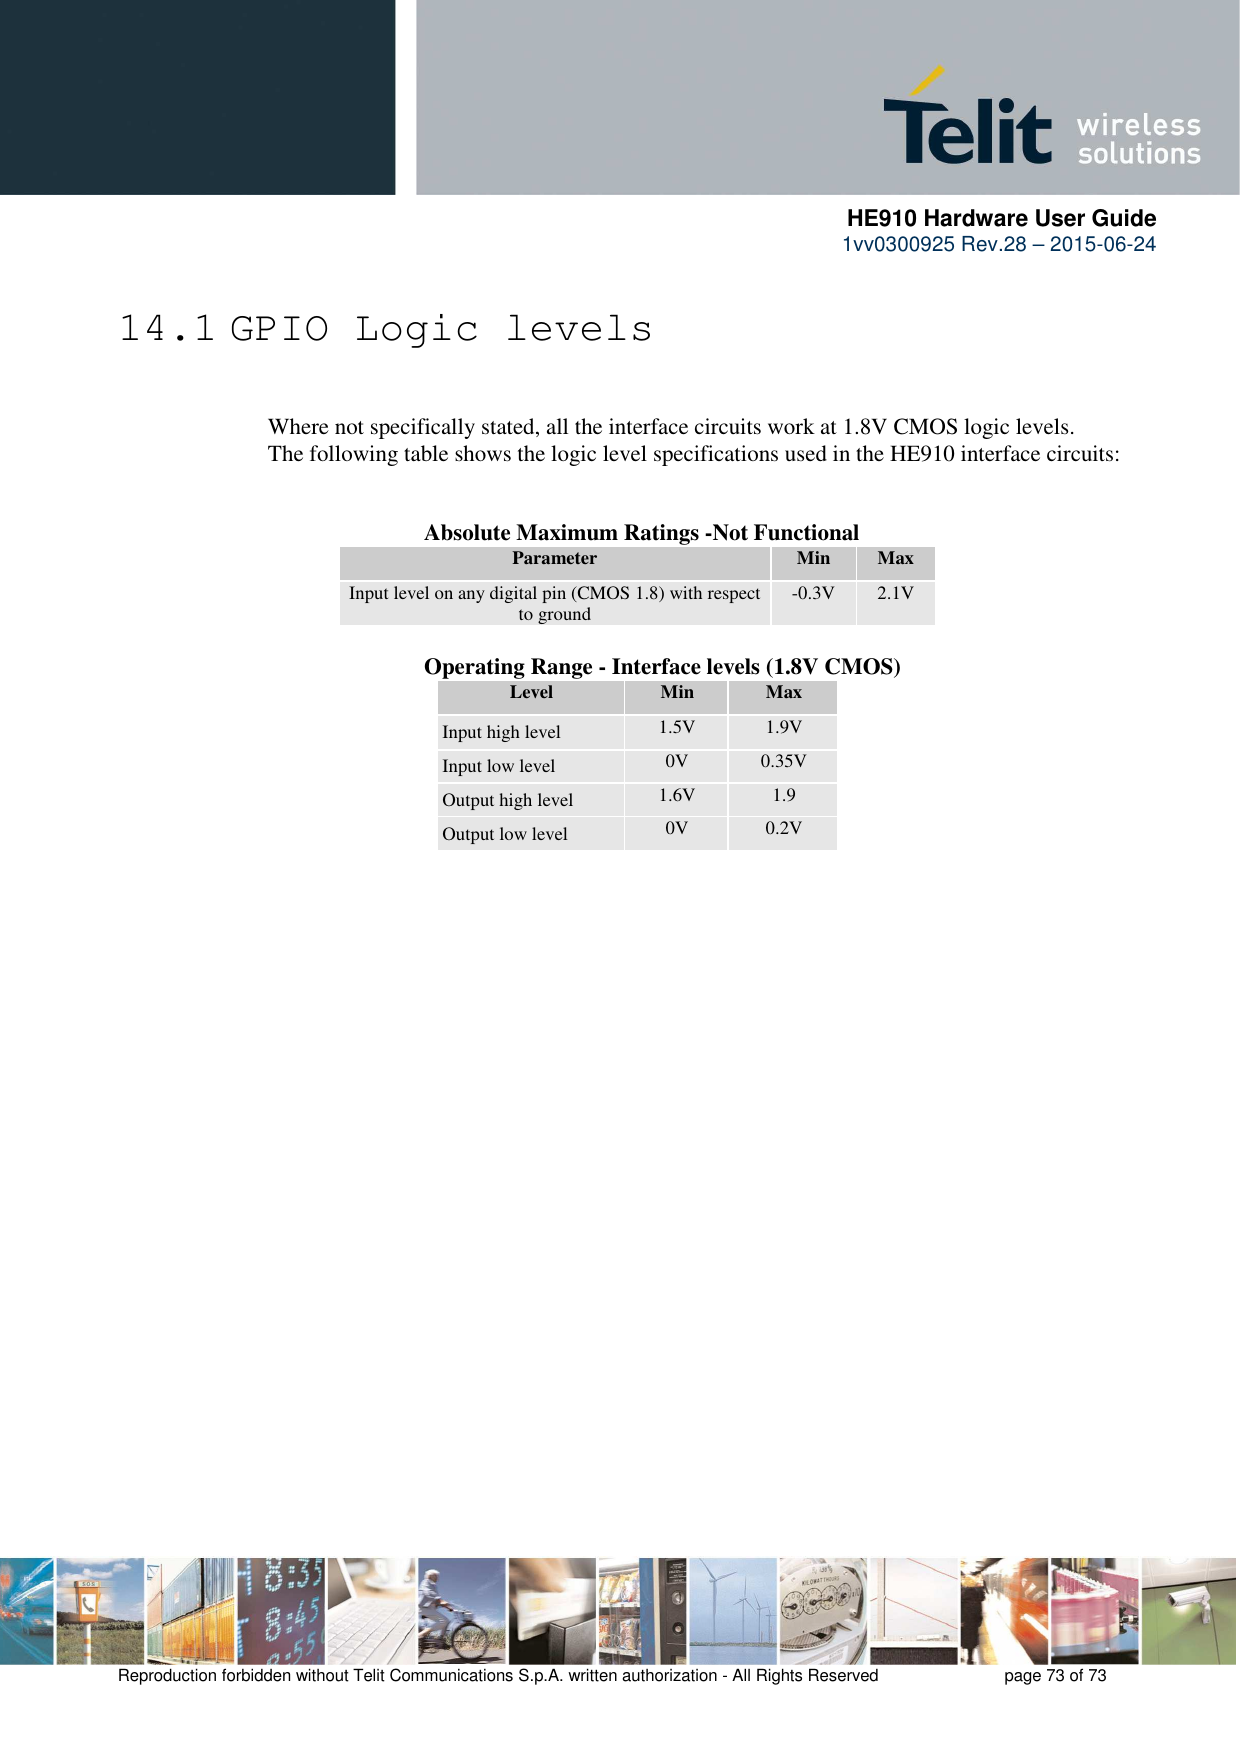      HE910 Hardware User Guide 1vv0300925 Rev.28 – 2015-06-24    Reproduction forbidden without Telit Communications S.p.A. written authorization - All Rights Reserved    page 73 of 73  14.1 GPIO Logic levels   Where not specifically stated, all the interface circuits work at 1.8V CMOS logic levels. The following table shows the logic level specifications used in the HE910 interface circuits:                  Absolute Maximum Ratings -Not Functional Parameter  Min  Max Input level on any digital pin (CMOS 1.8) with respect to ground  -0.3V  2.1V              Operating Range - Interface levels (1.8V CMOS) Level  Min  Max Input high level  1.5V  1.9V Input low level  0V  0.35V Output high level  1.6V  1.9 Output low level  0V  0.2V         